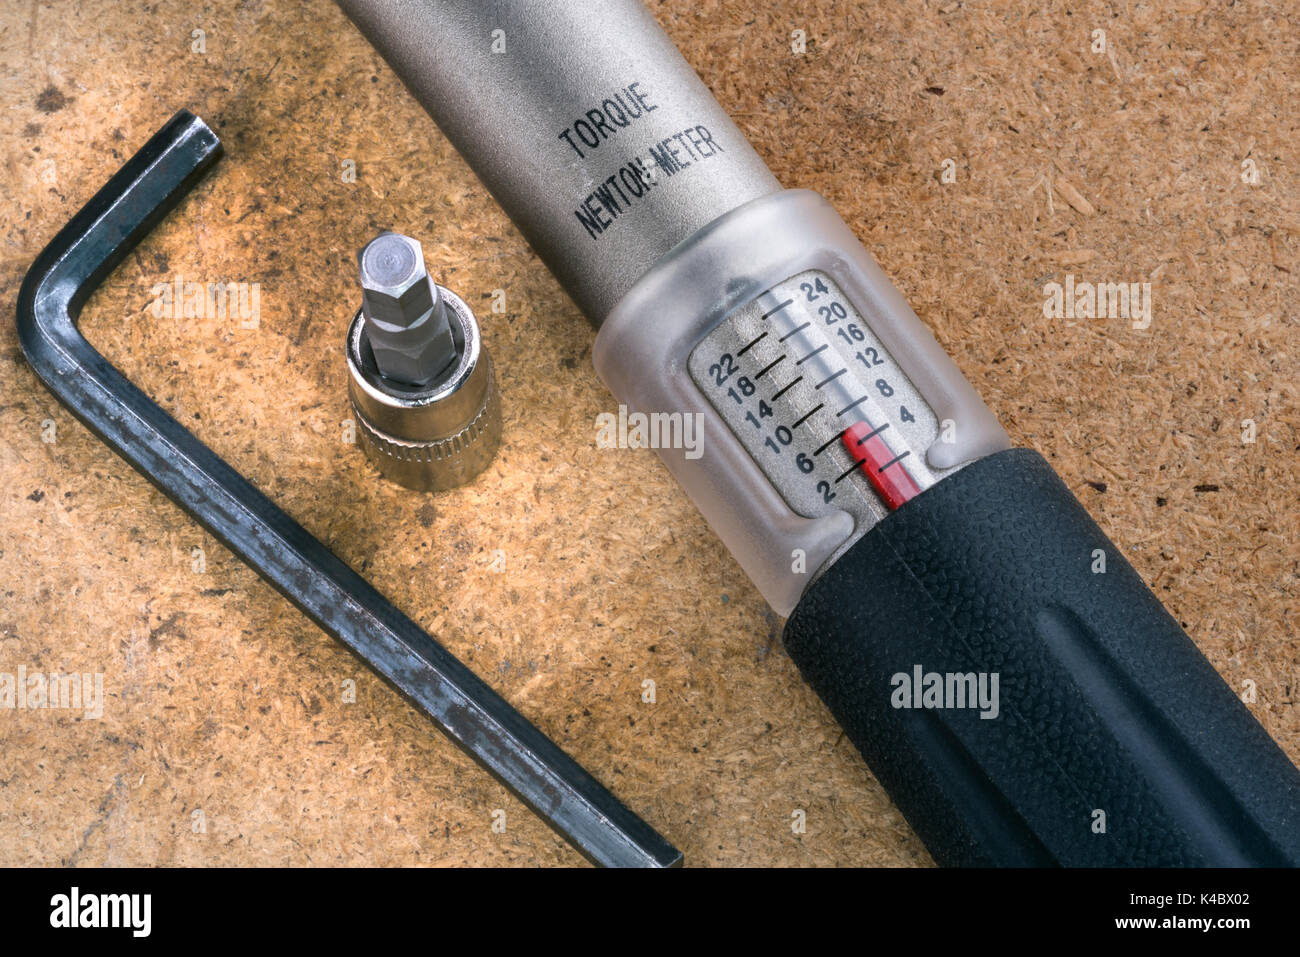 Torque wrench with hex bit and allne key Stock Photo